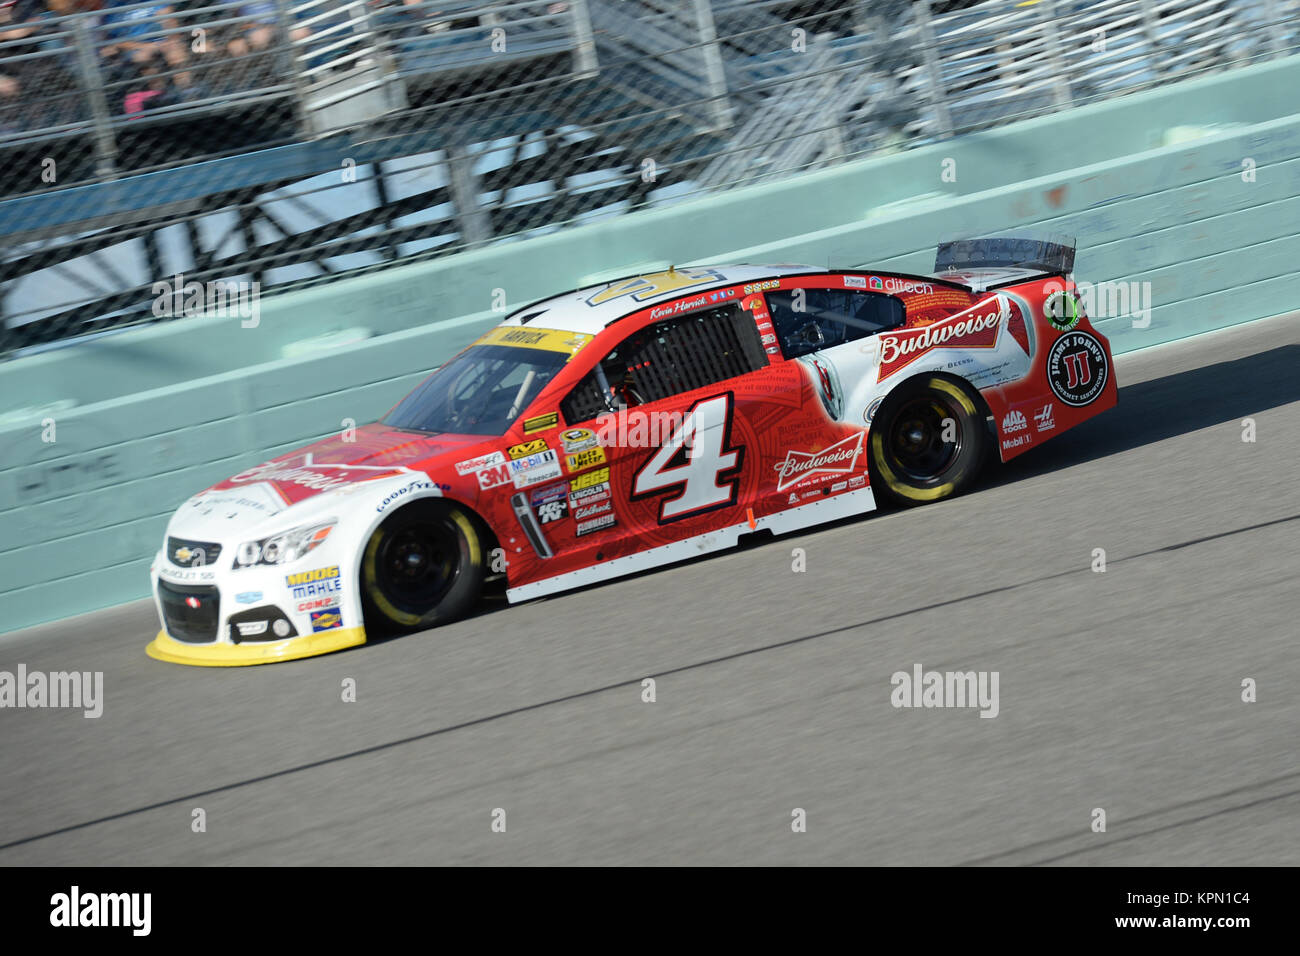 HOMESTEAD, FL - NOVEMBER 16:  Kevin Harvick during the NASCAR Sprint Cup Series Ford EcoBoost 400 at Homestead-Miami Speedway on November 16, 2014 in Homestead, Florida.  People:  Kevin Harvick Stock Photo